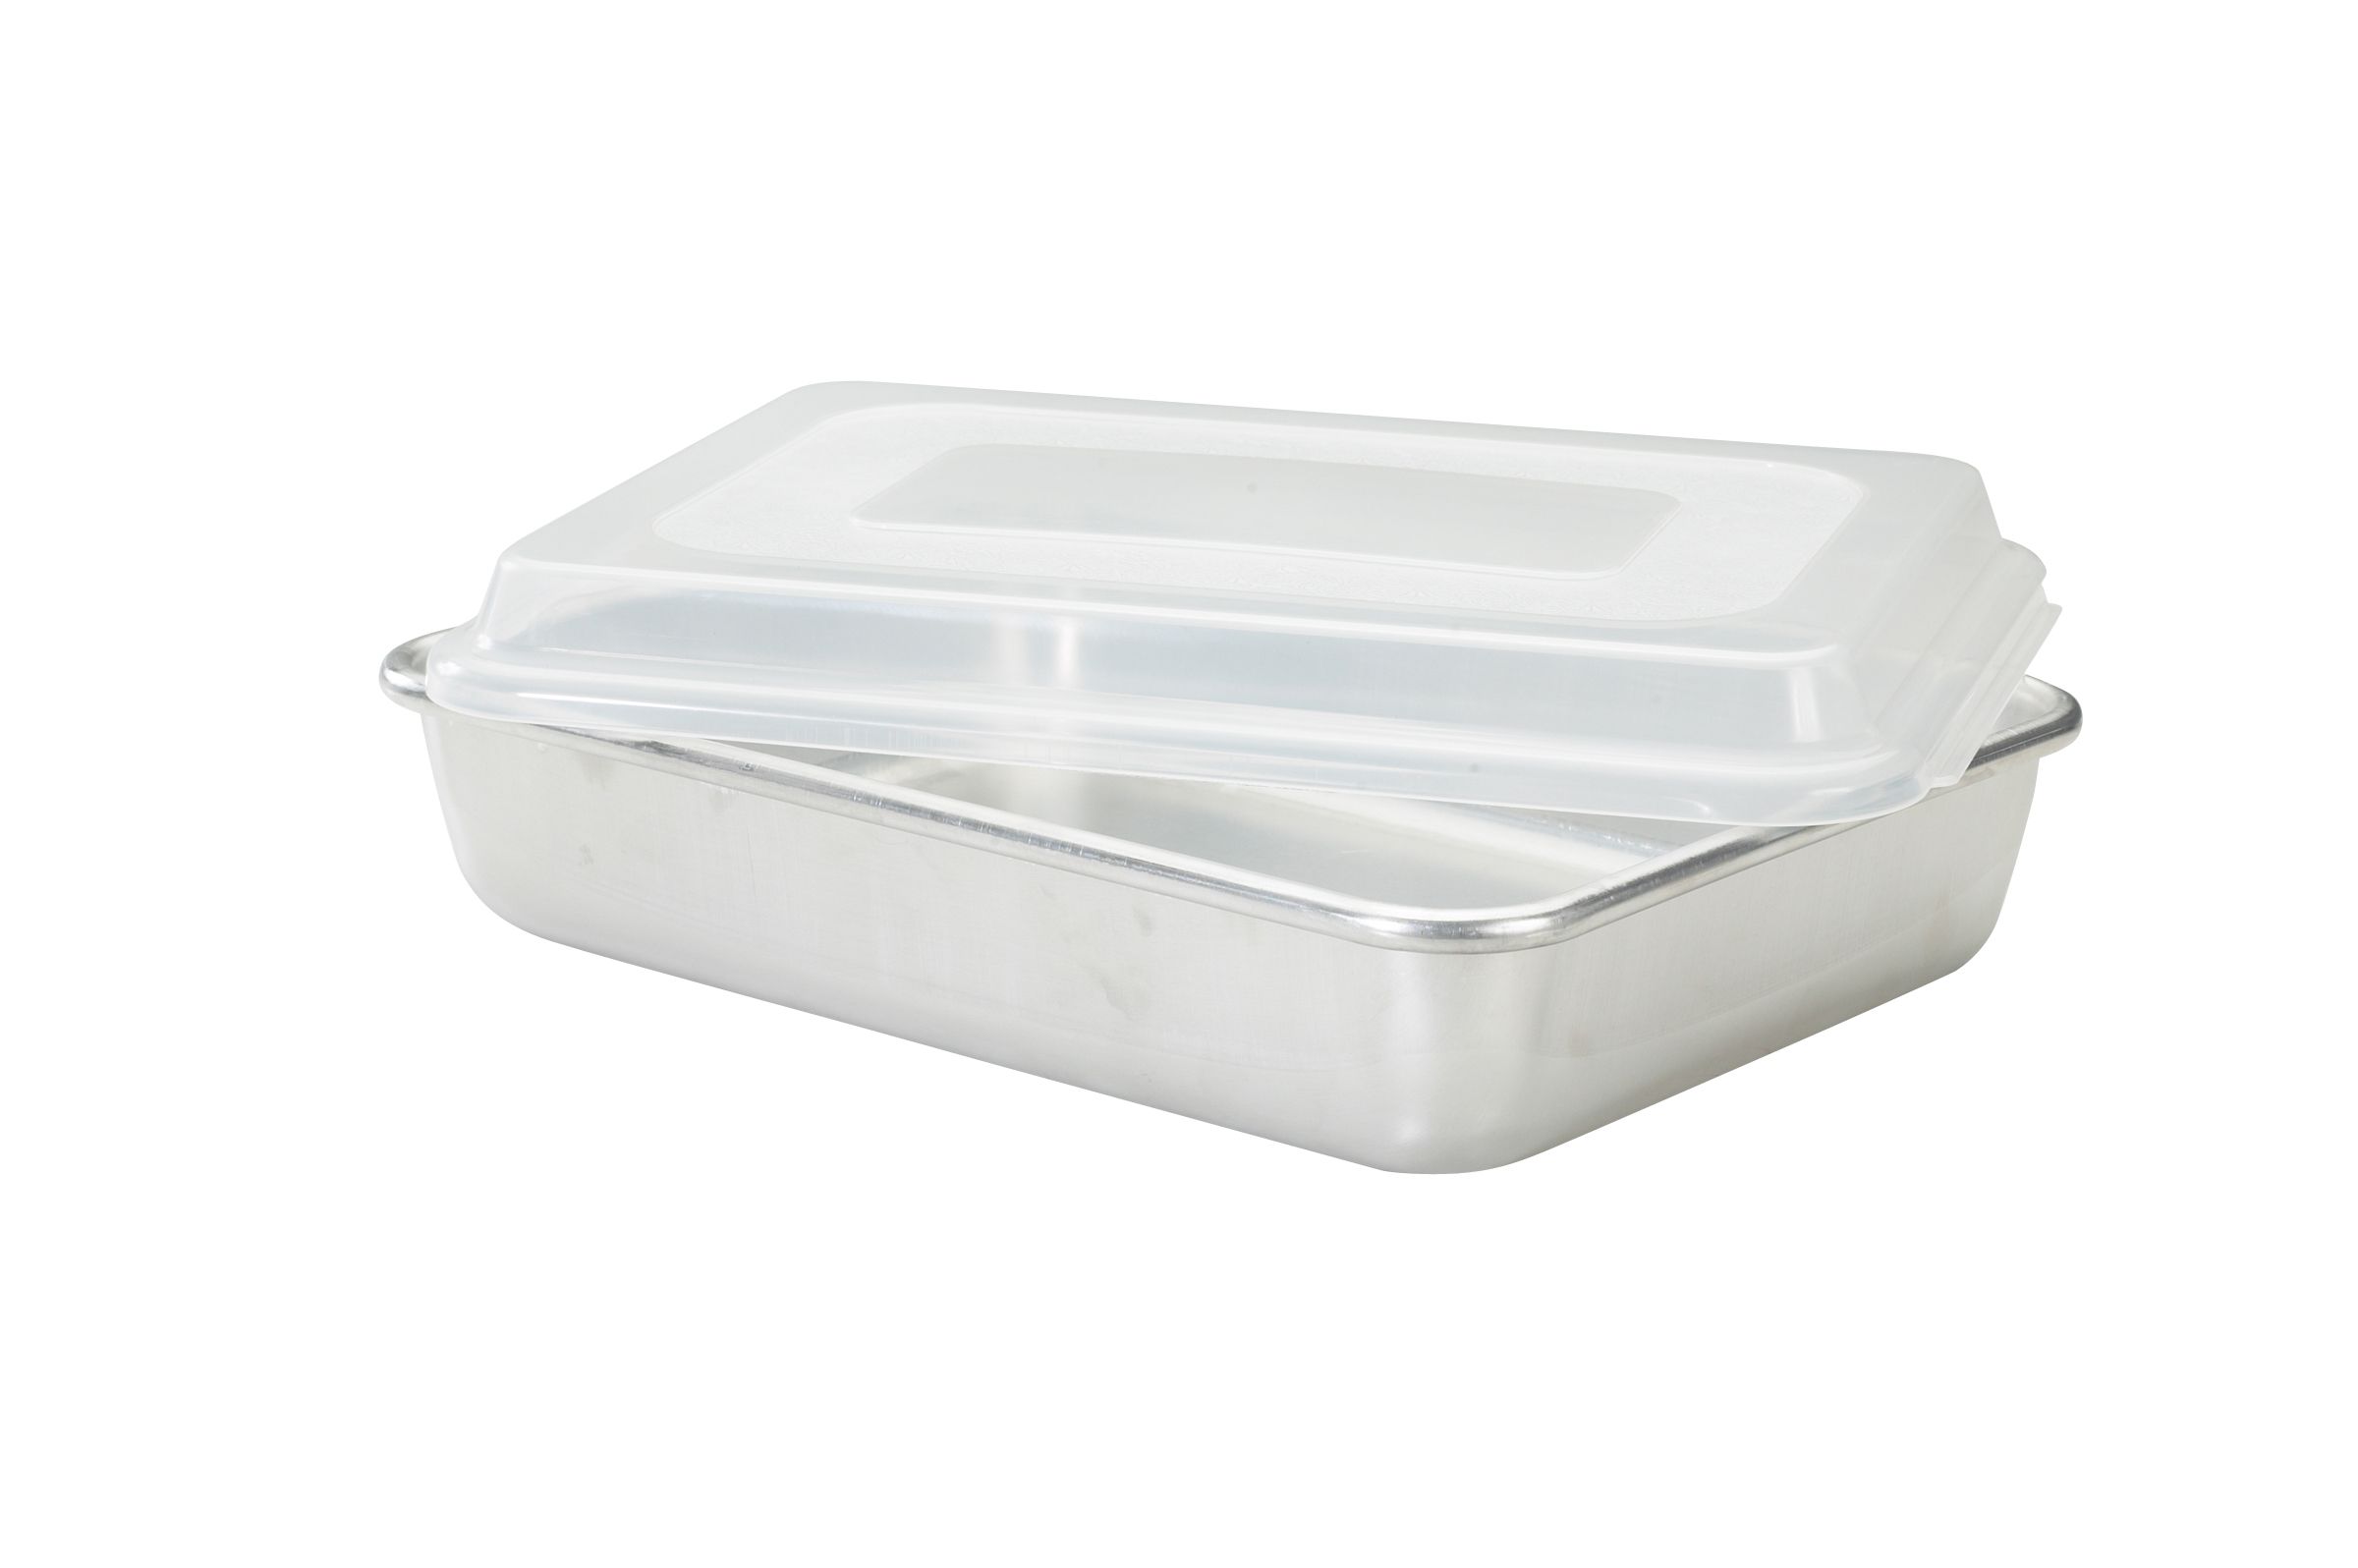 Nordic Ware The Naturals Uncoated Commercial Aluminum Baker Cake Pan with Lid